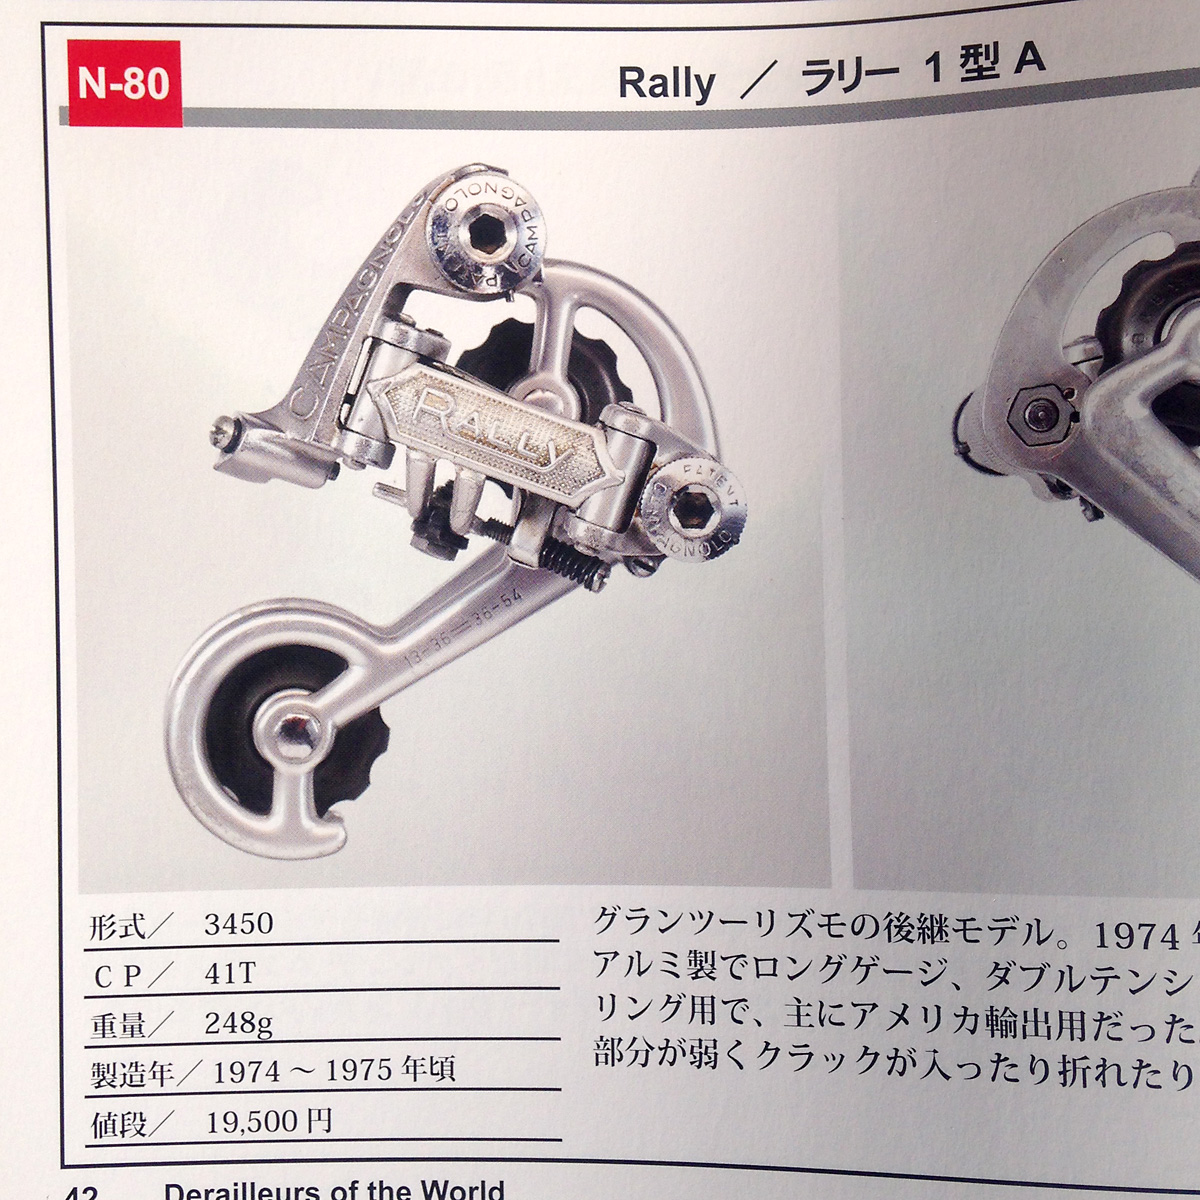 Campagnolo Rally rear derailleur - hardfacts like model number, capacity, weight, date of production, price